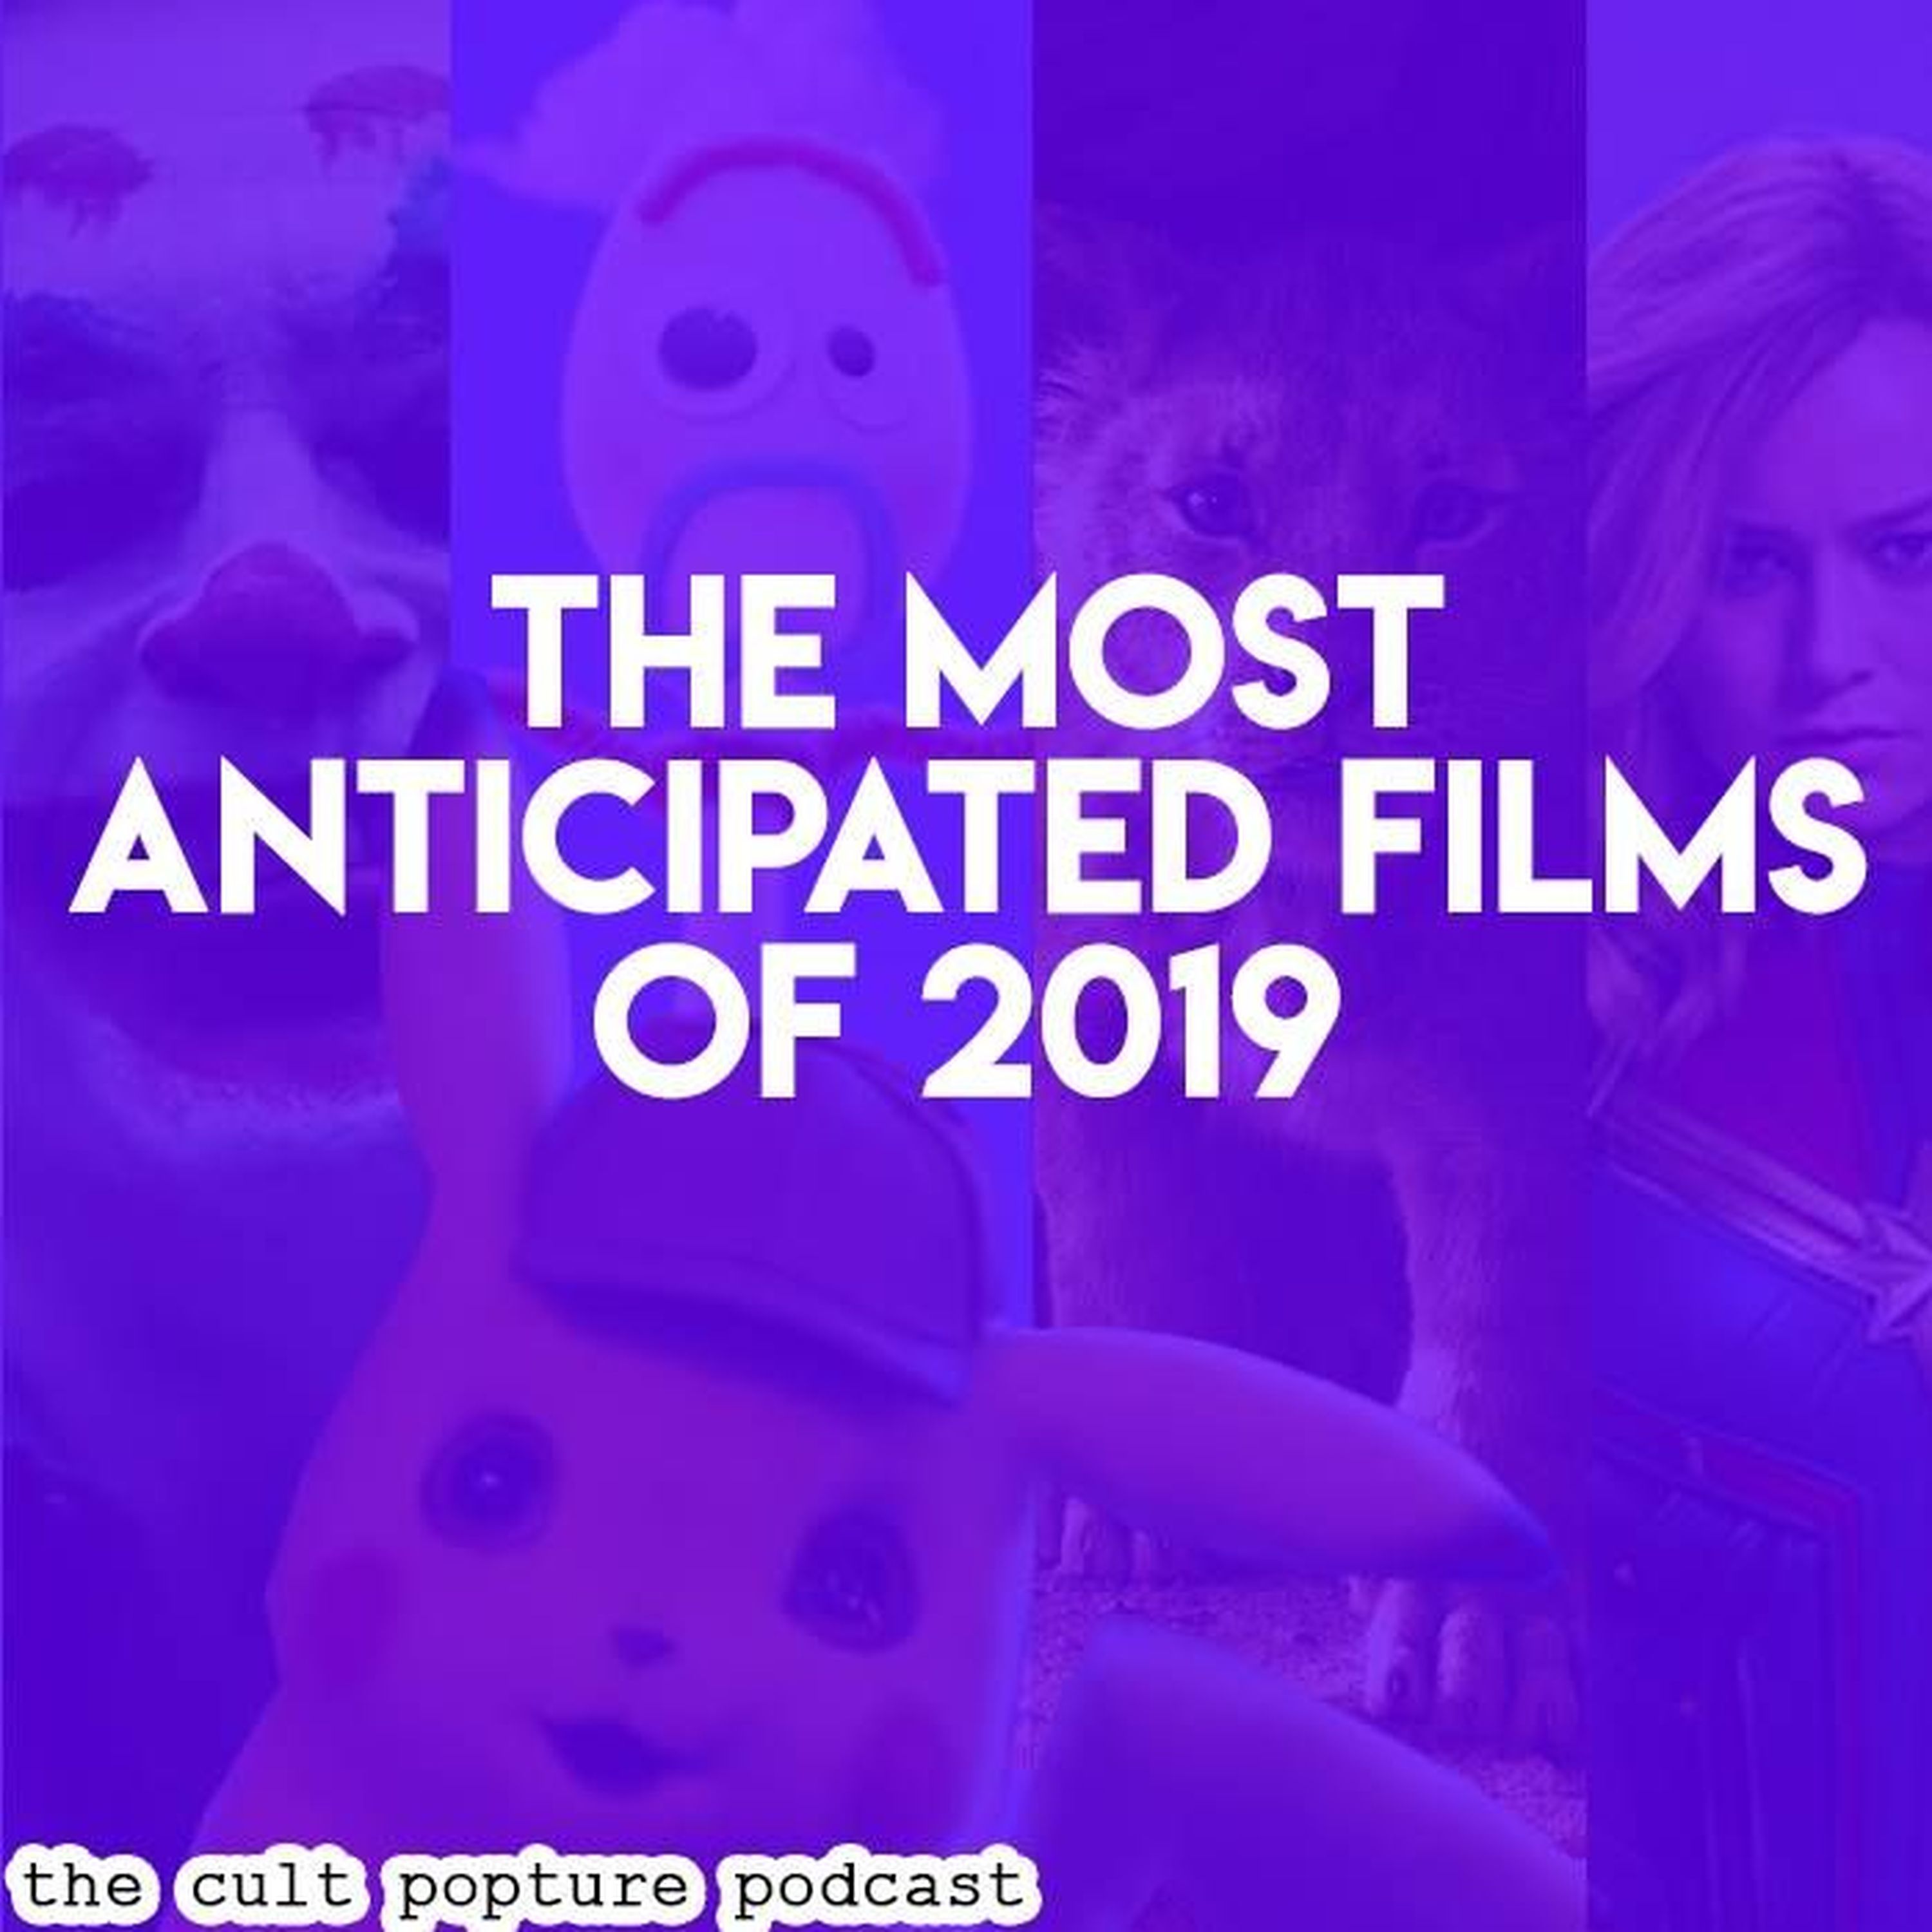 The Most Anticipated Films of 2019 | The Cult Popture Podcast